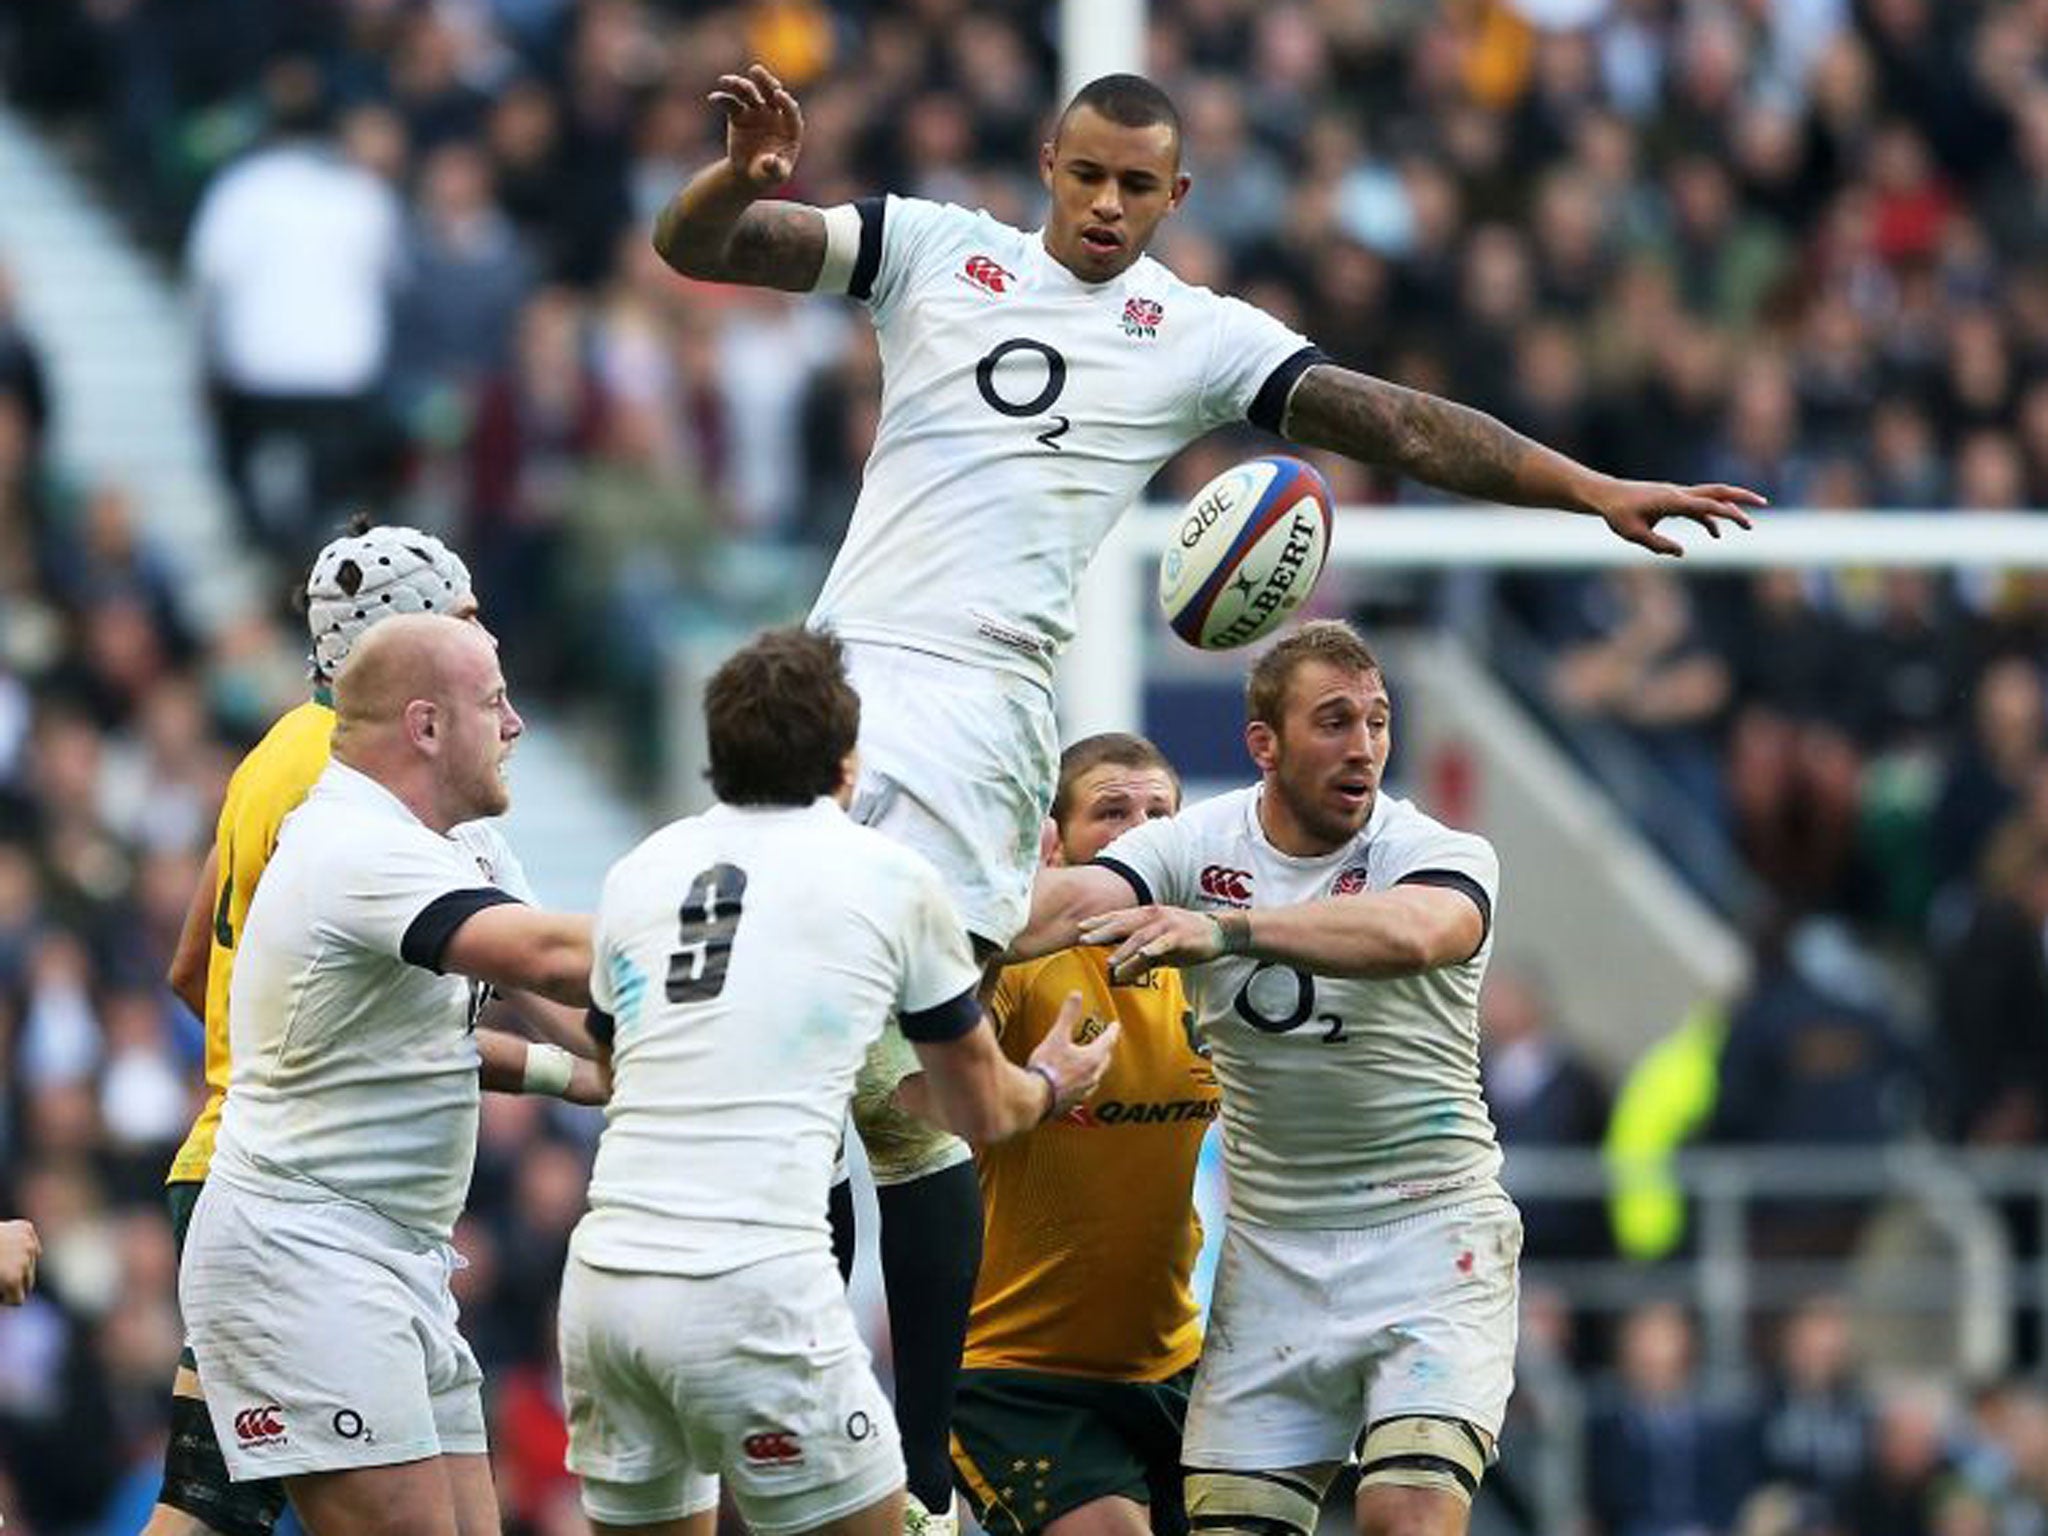 Courtney Lawes claims the lineout ball authoritatively against Australia on Saturday